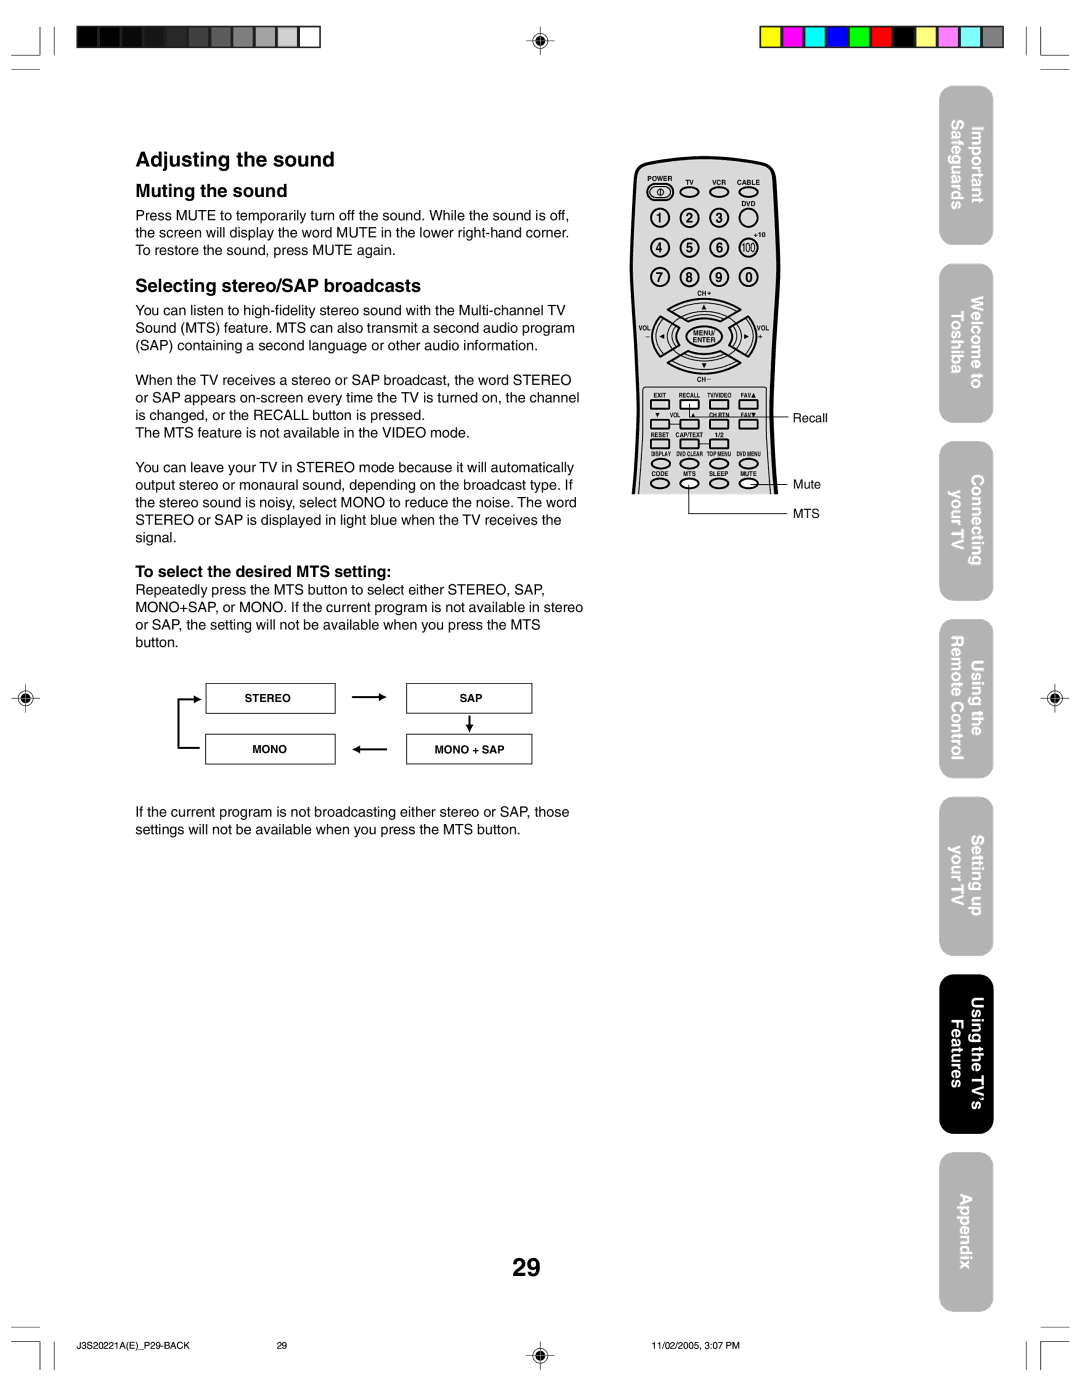 Toshiba 27A45 appendix Adjusting the sound, Muting the sound, Selecting stereo/SAP broadcasts 